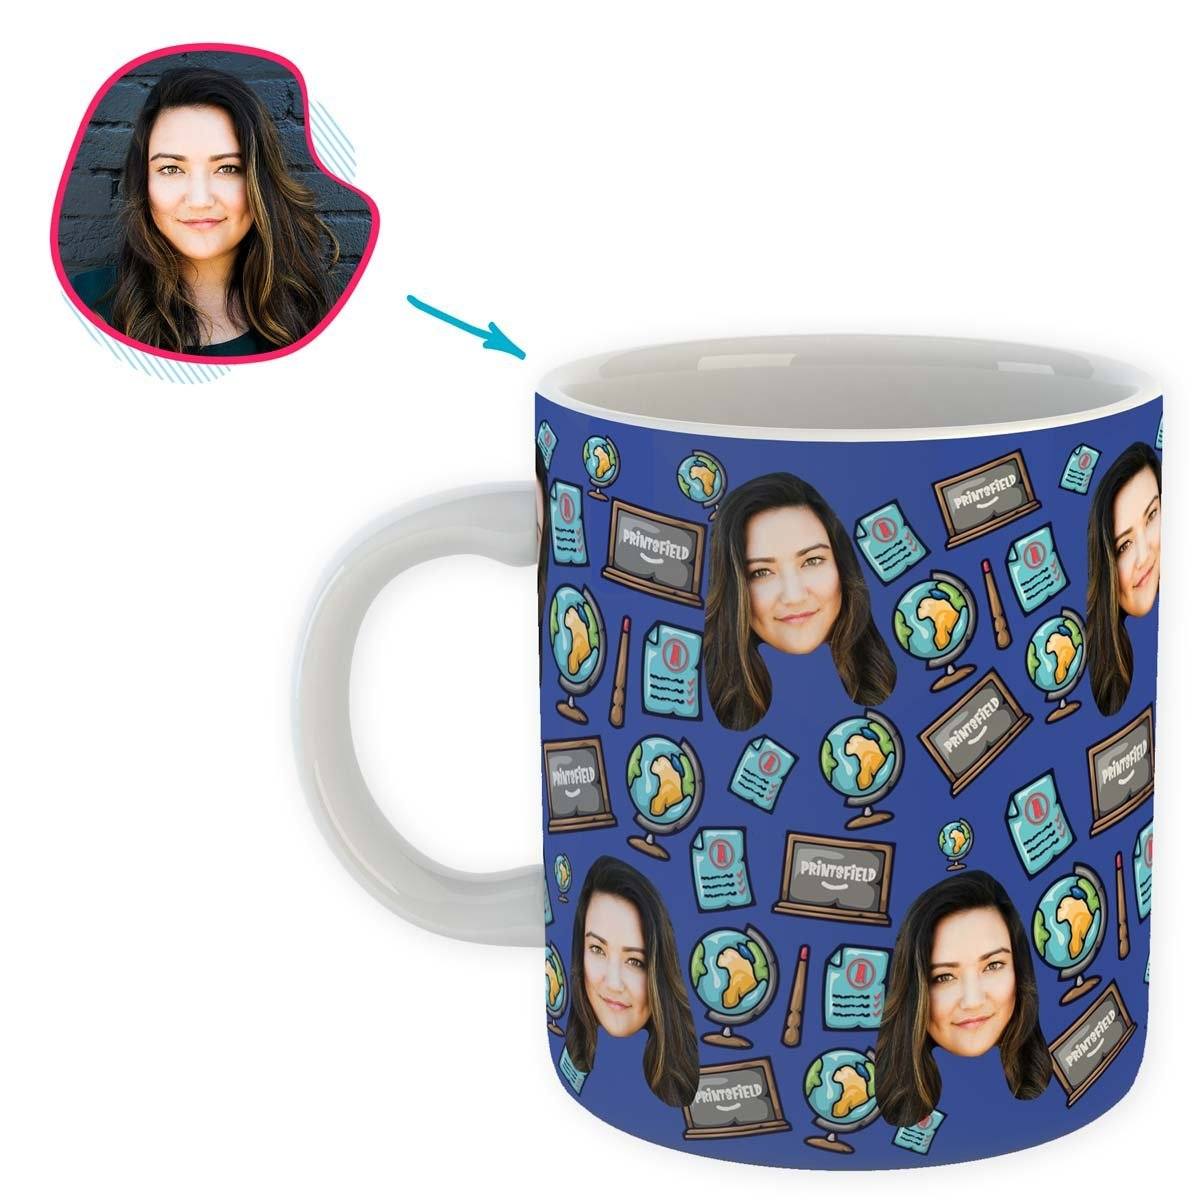 Darkblue Teacher personalized mug with photo of face printed on it